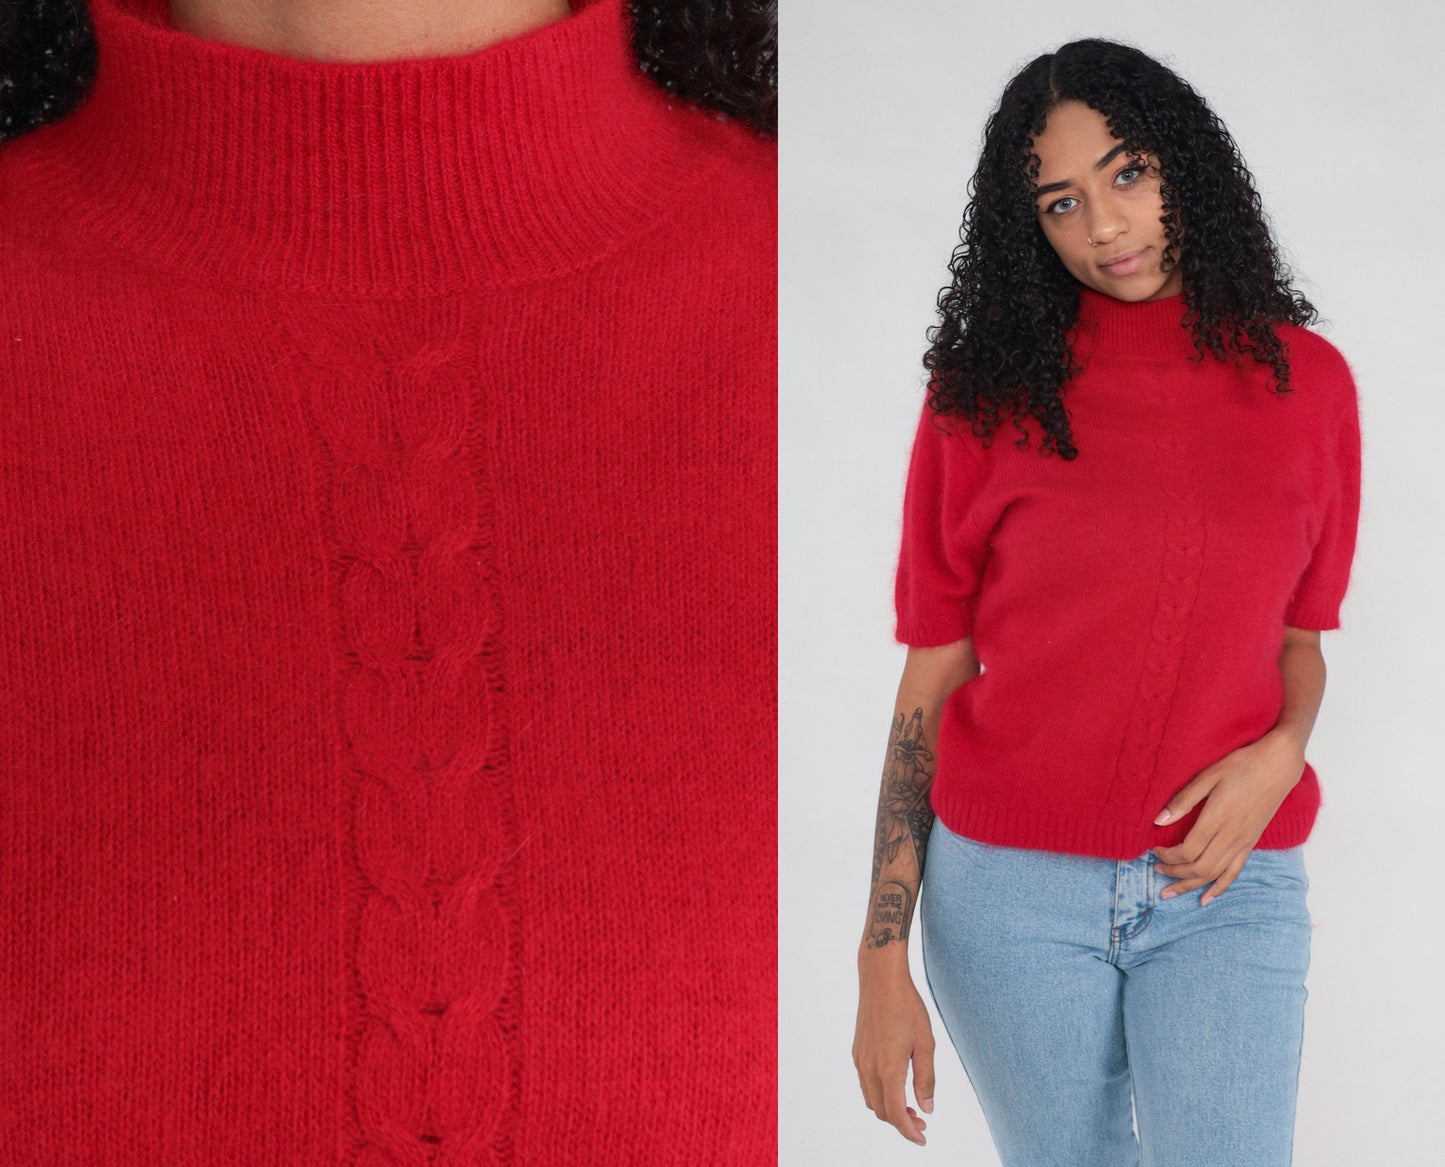 Red Angora Sweater 90s Mock Neck Sweater Top Retro Cable Knit Short Sleeve Sweater Fuzzy Warm Basic Simple Plain Minimal Vintage 1990s Large